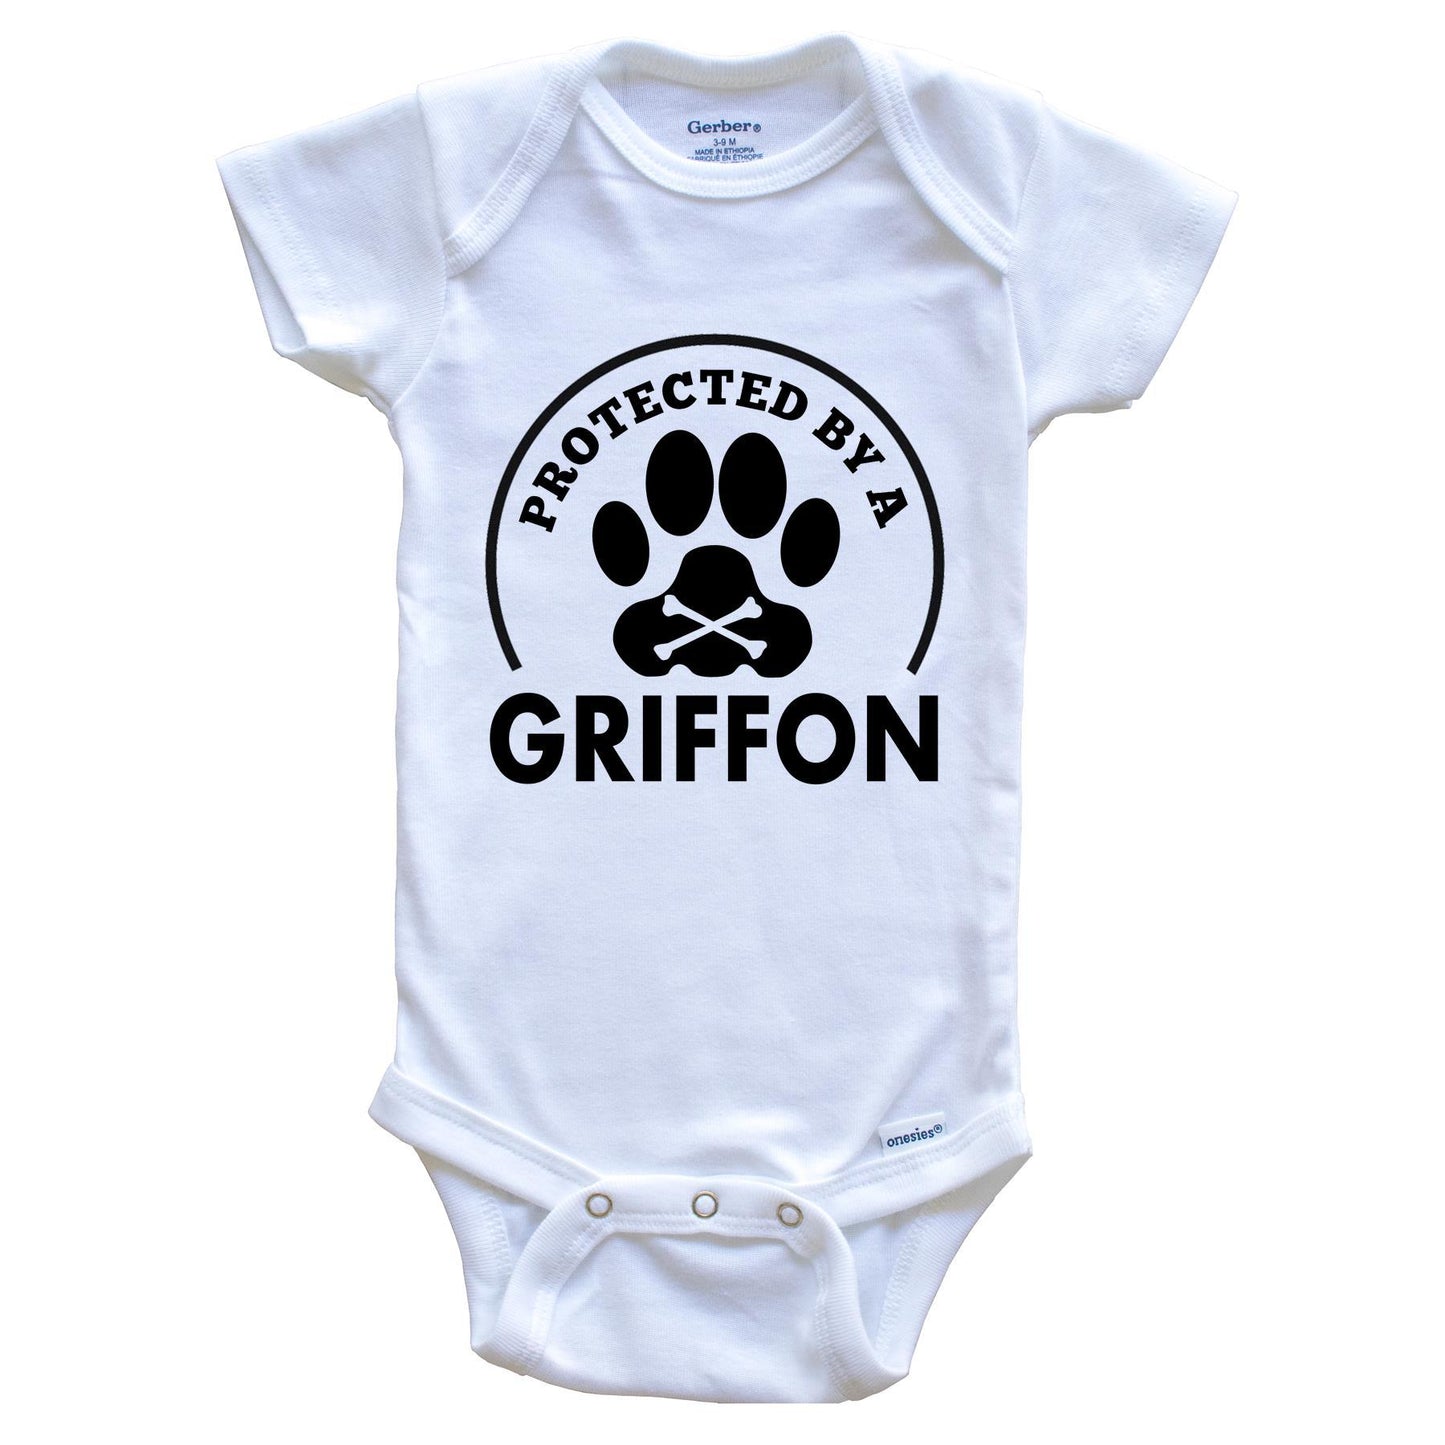 Protected By A Griffon Funny Baby Onesie